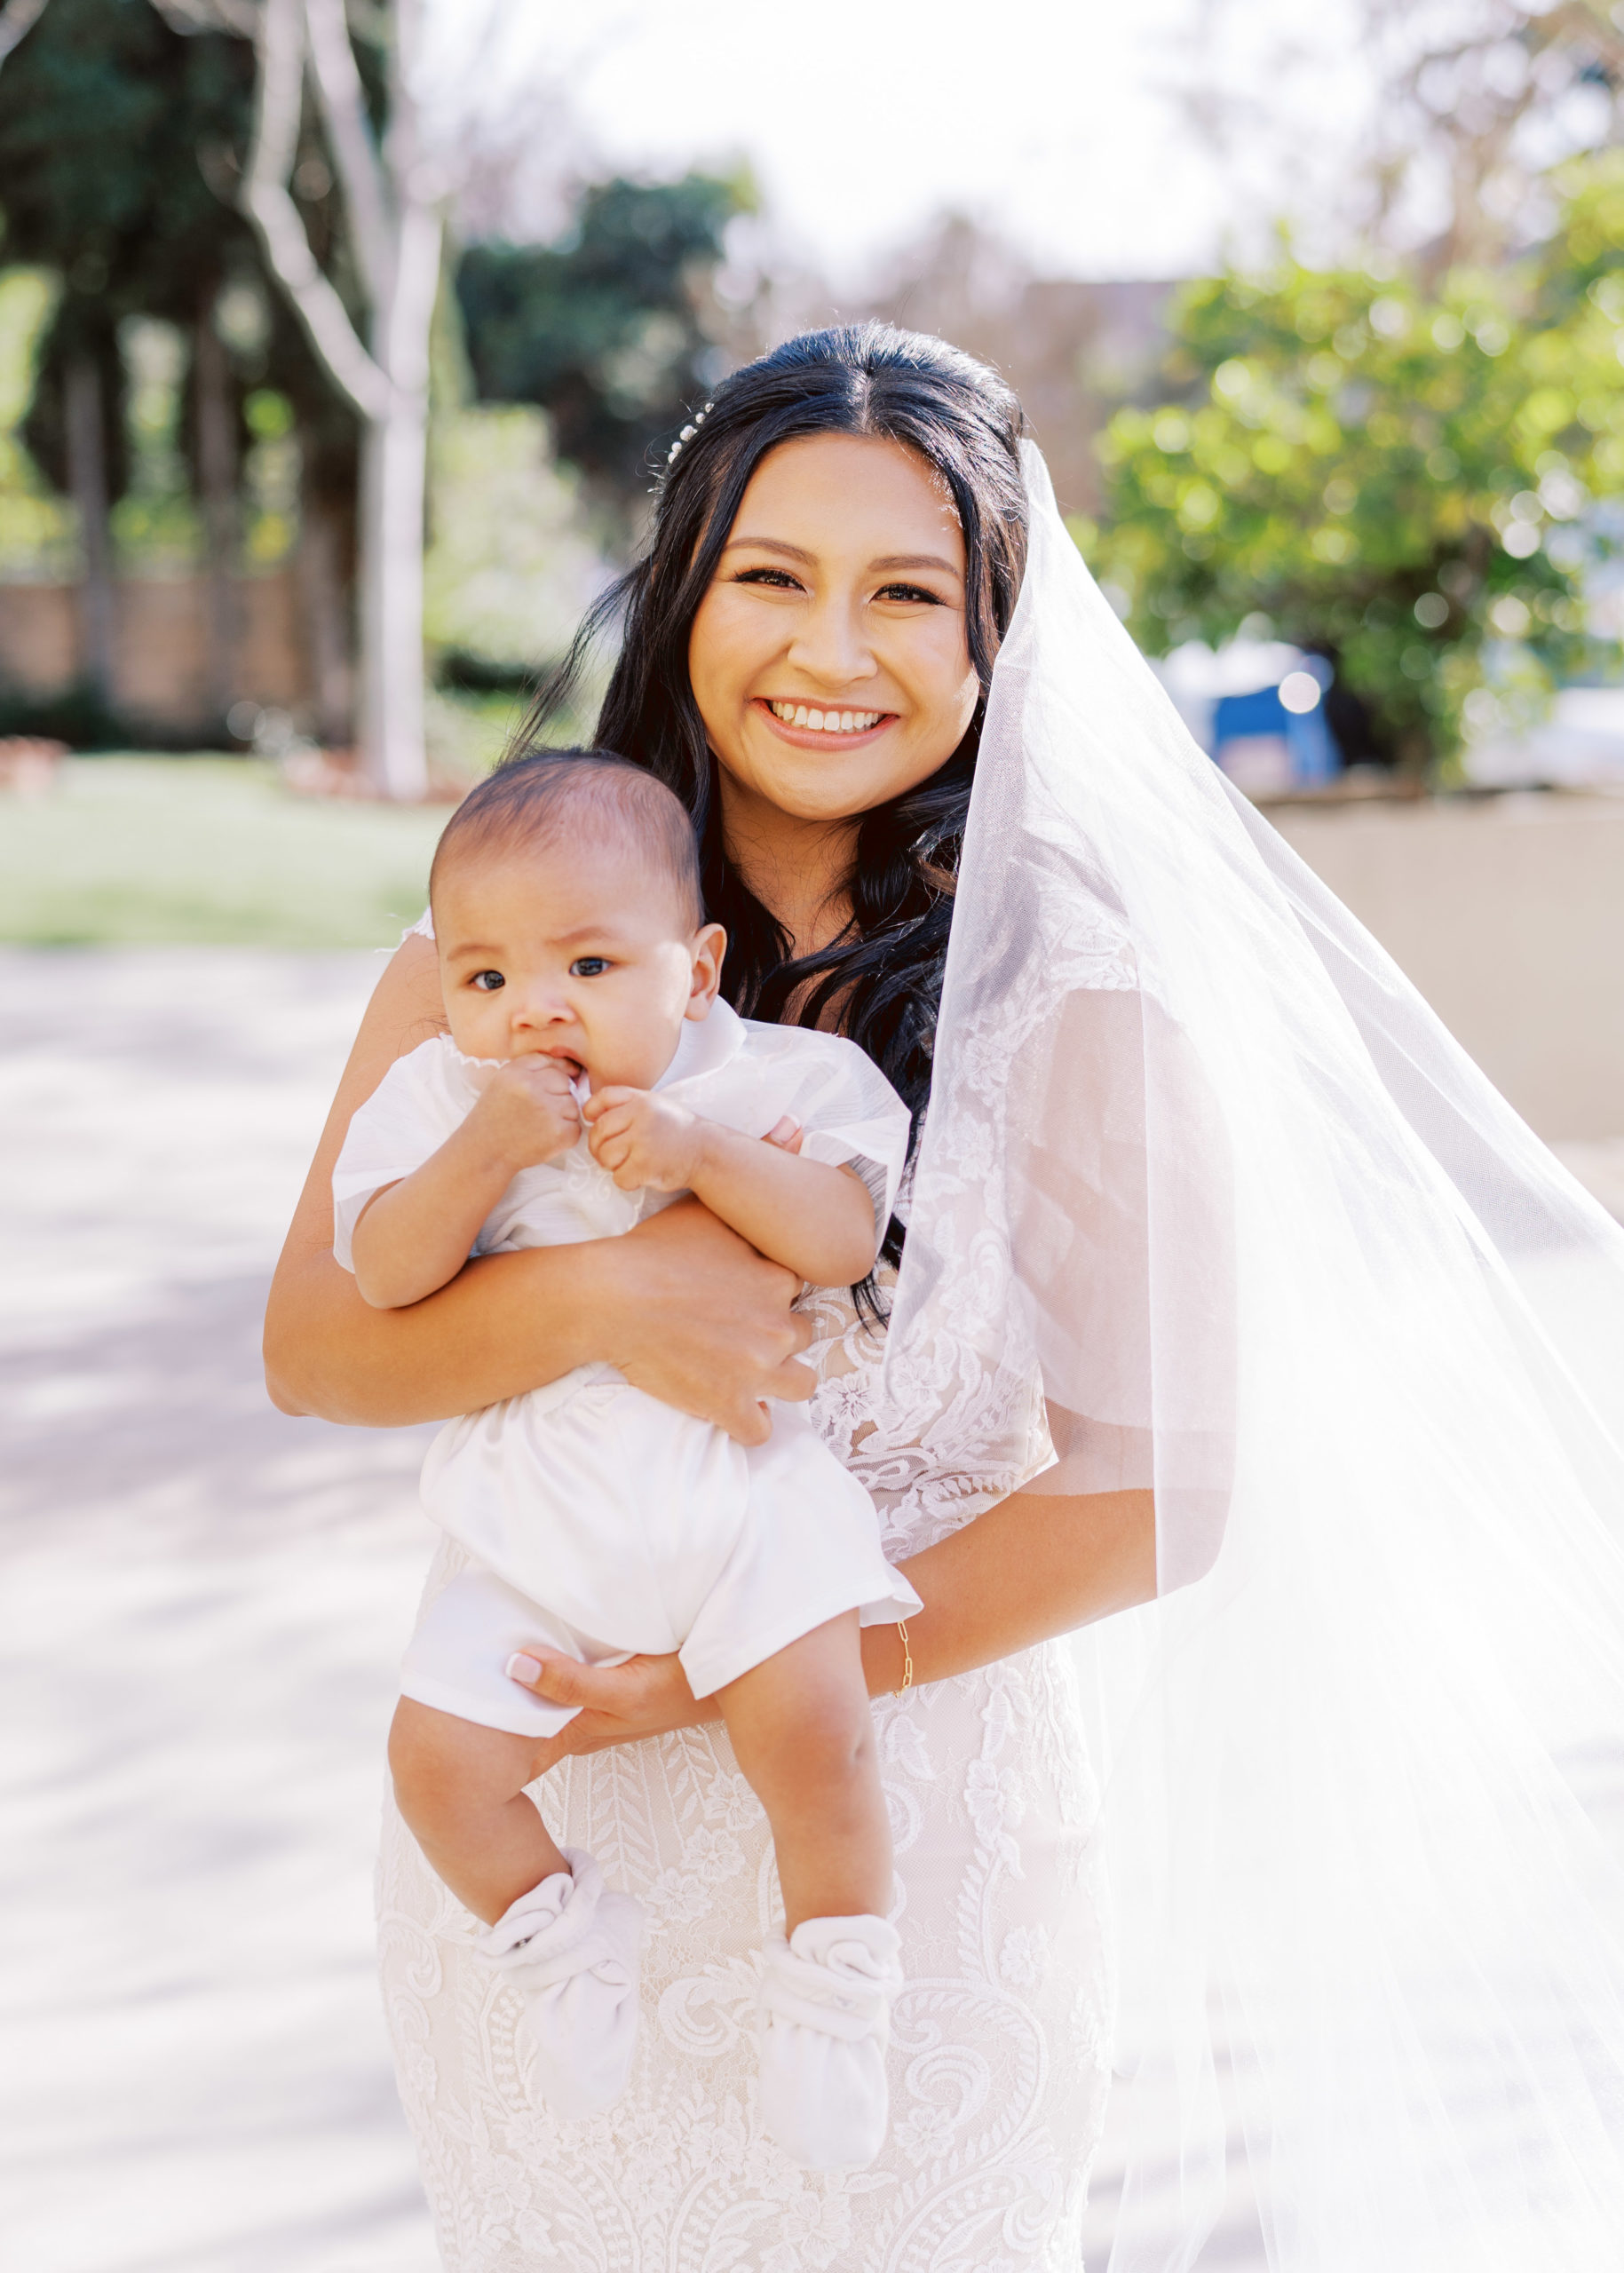 bride in lace wedding dress holds baby during wedding portrait shots